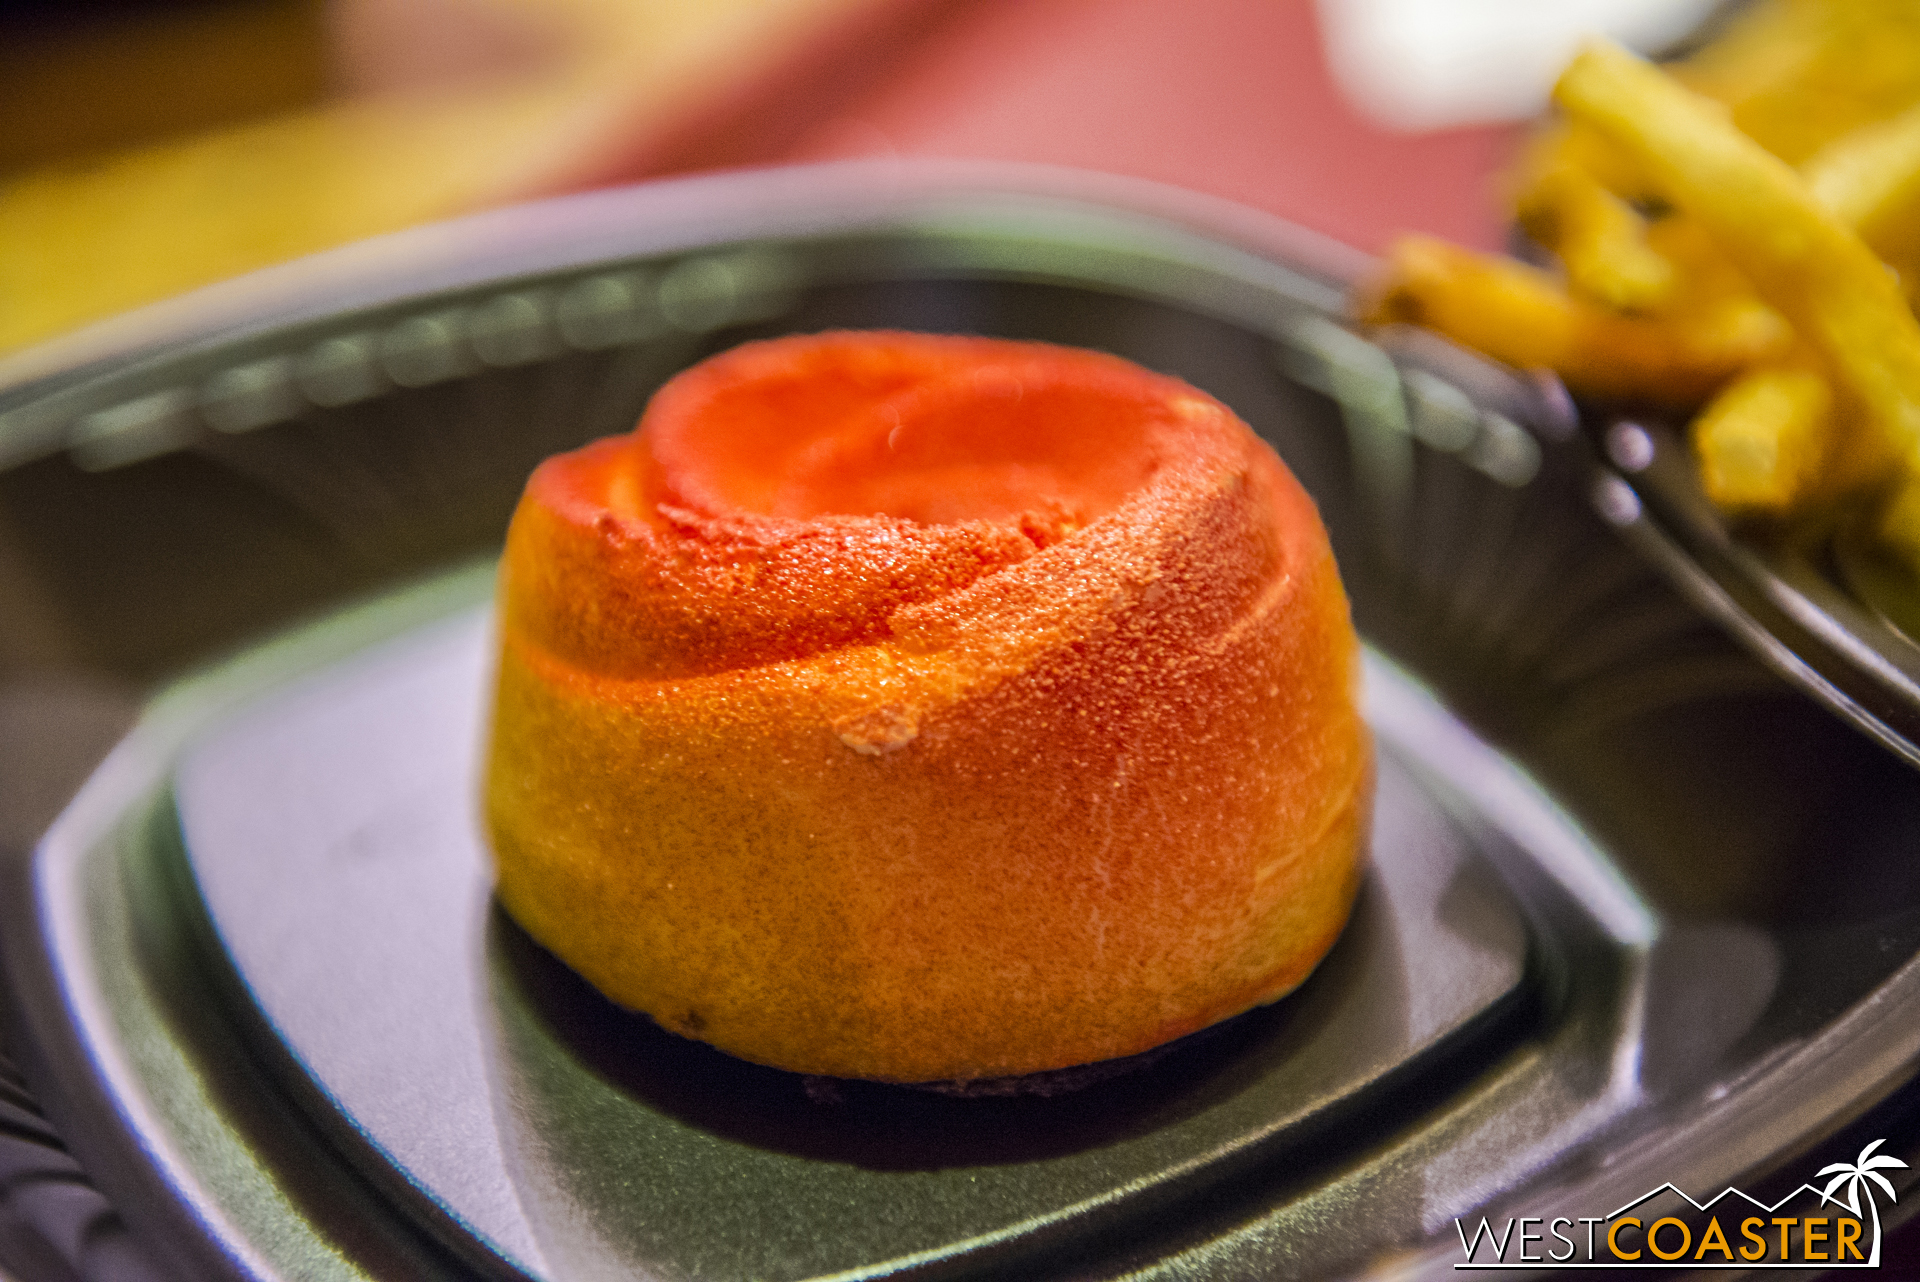  The Lemon Rose Cake is the other special  Beauty and the Beast -inspired offering. &nbsp;Rich in lemon, with a strawberry filling that was tart and sweet, this was a not as dense as I was expecting. &nbsp;The lemon cream was quite light, and the pac